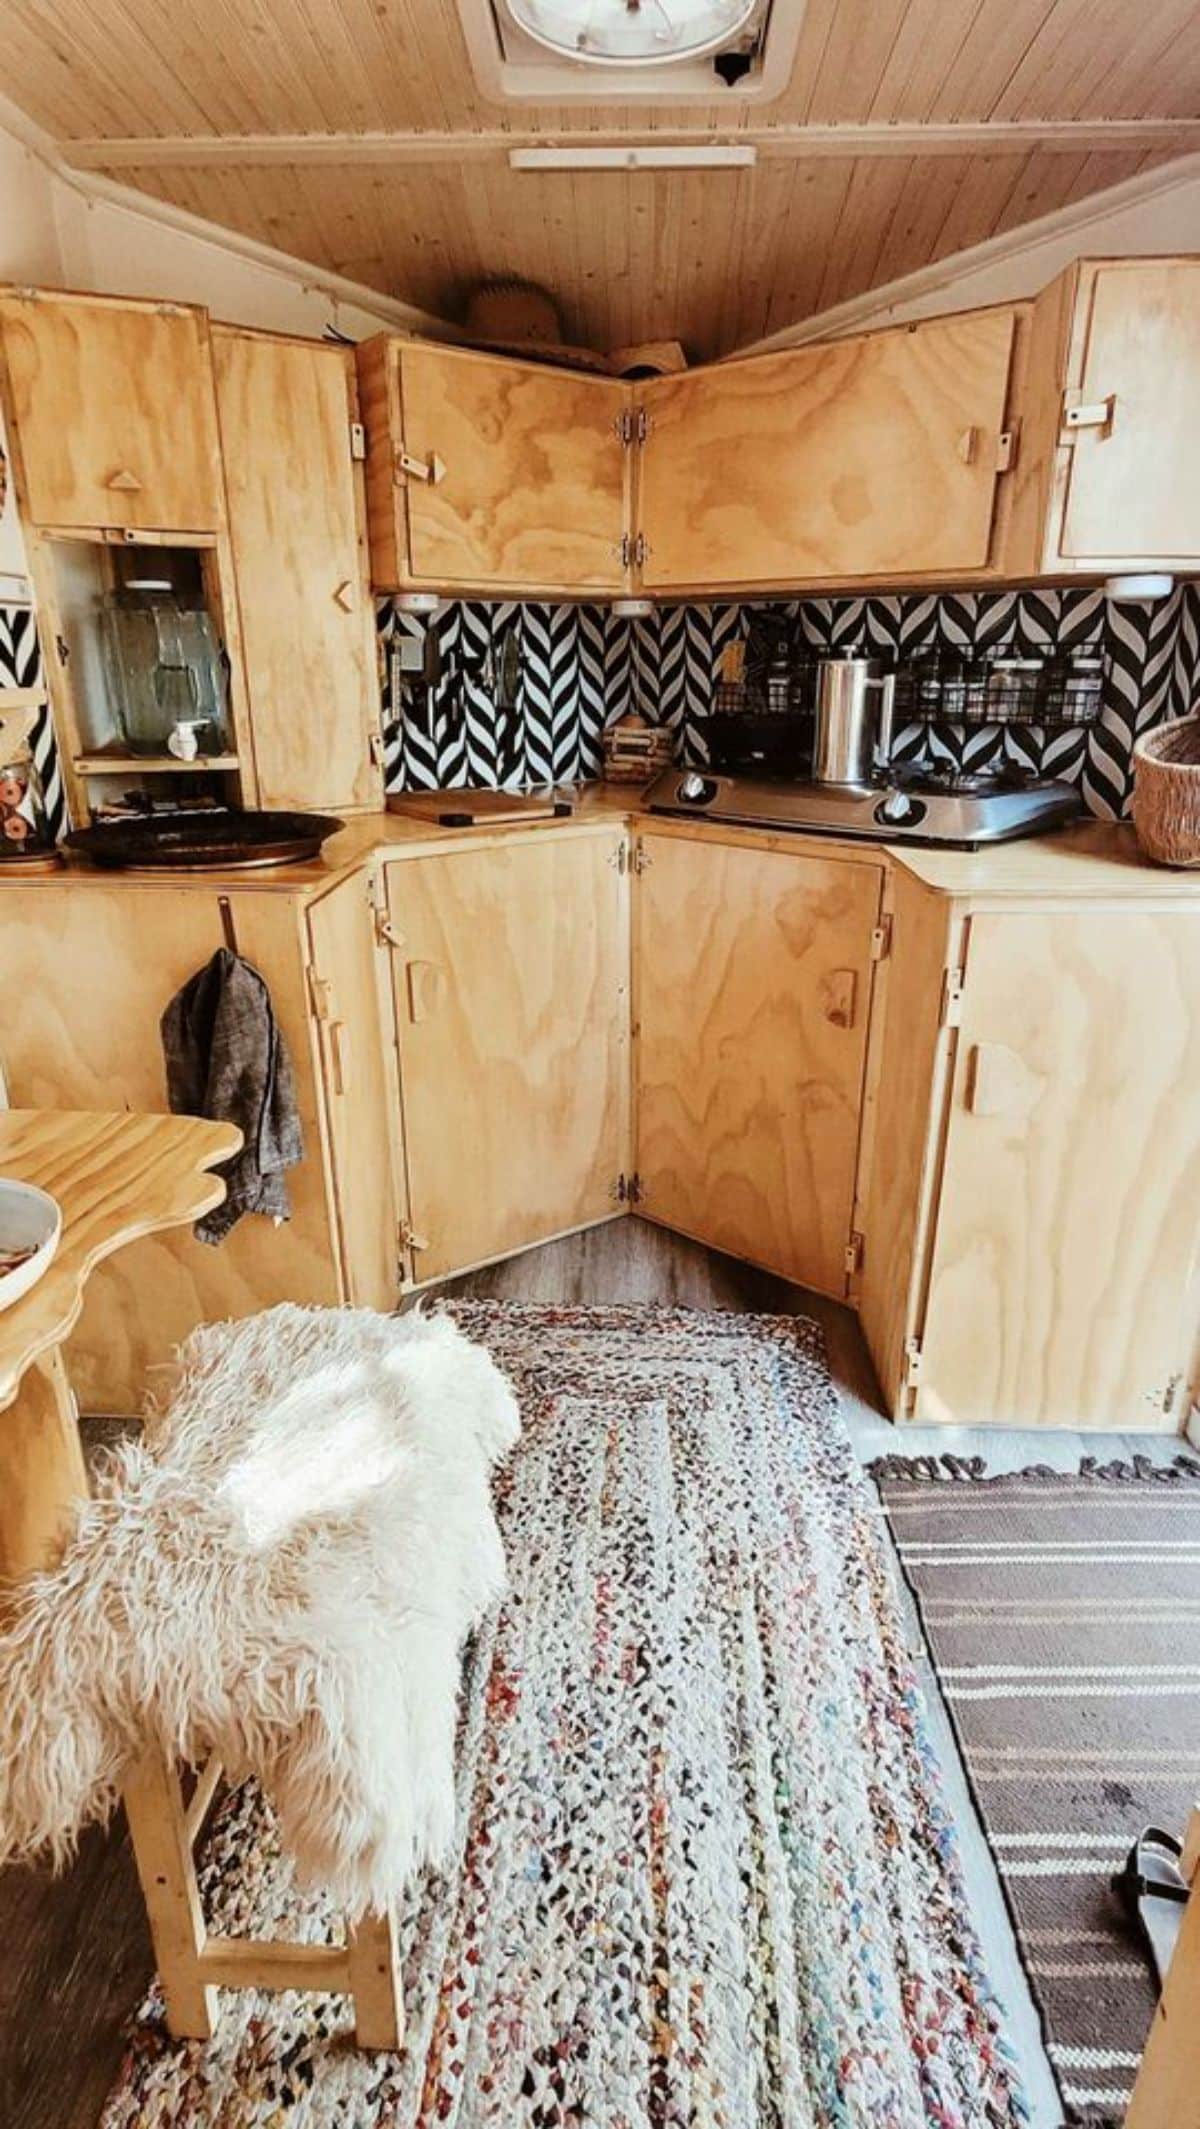 Compact kitchen area of 14’ Tiny Camper has a two burner stove, refrigerator etc